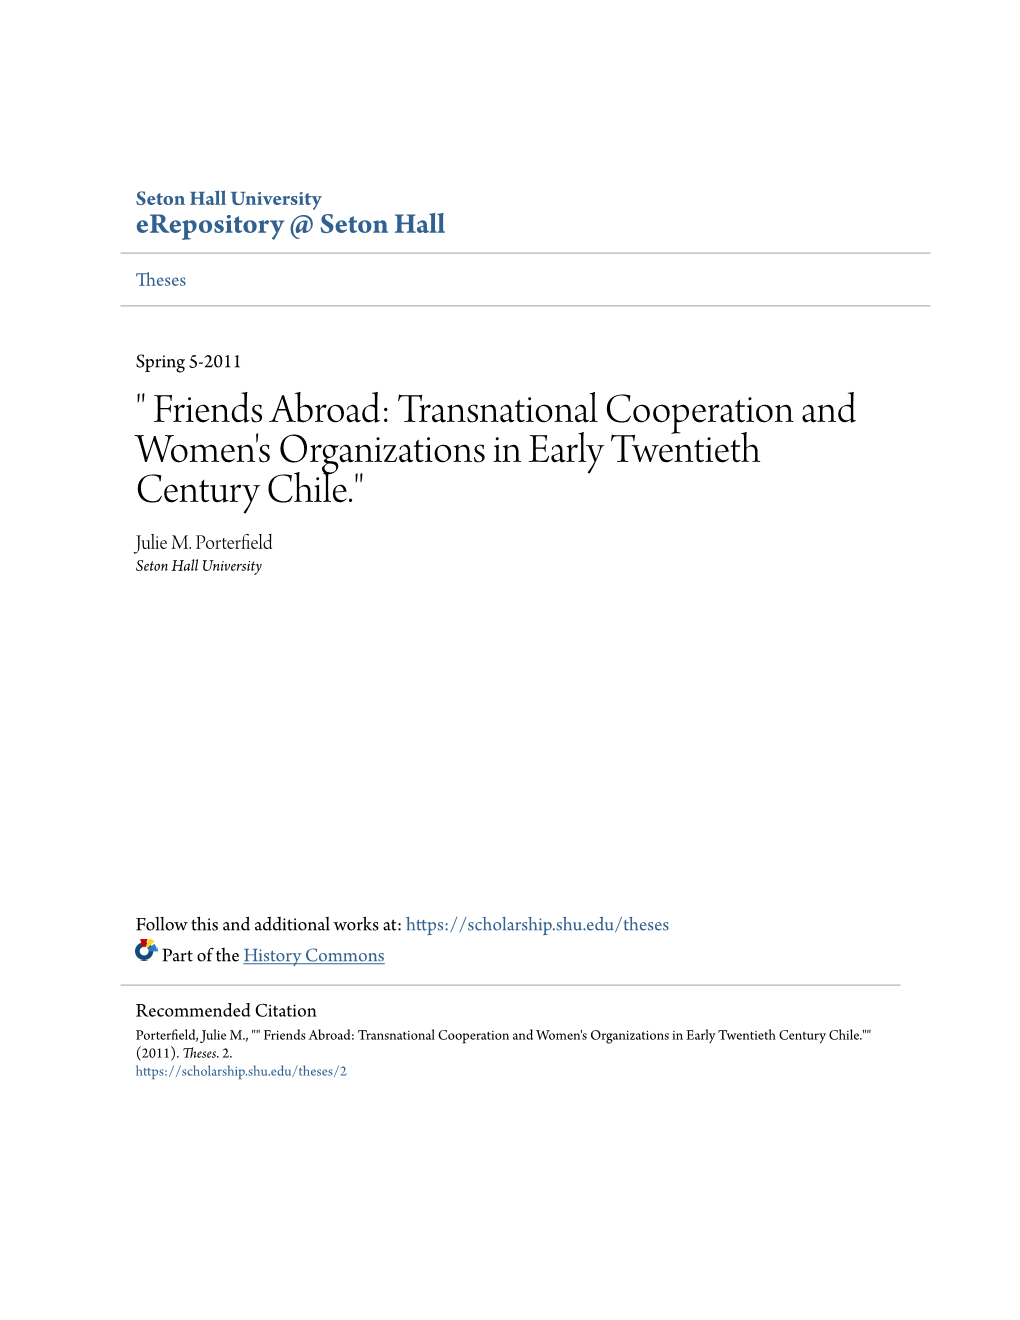 " Friends Abroad: Transnational Cooperation and Women's Organizations in Early Twentieth Century Chile." Julie M